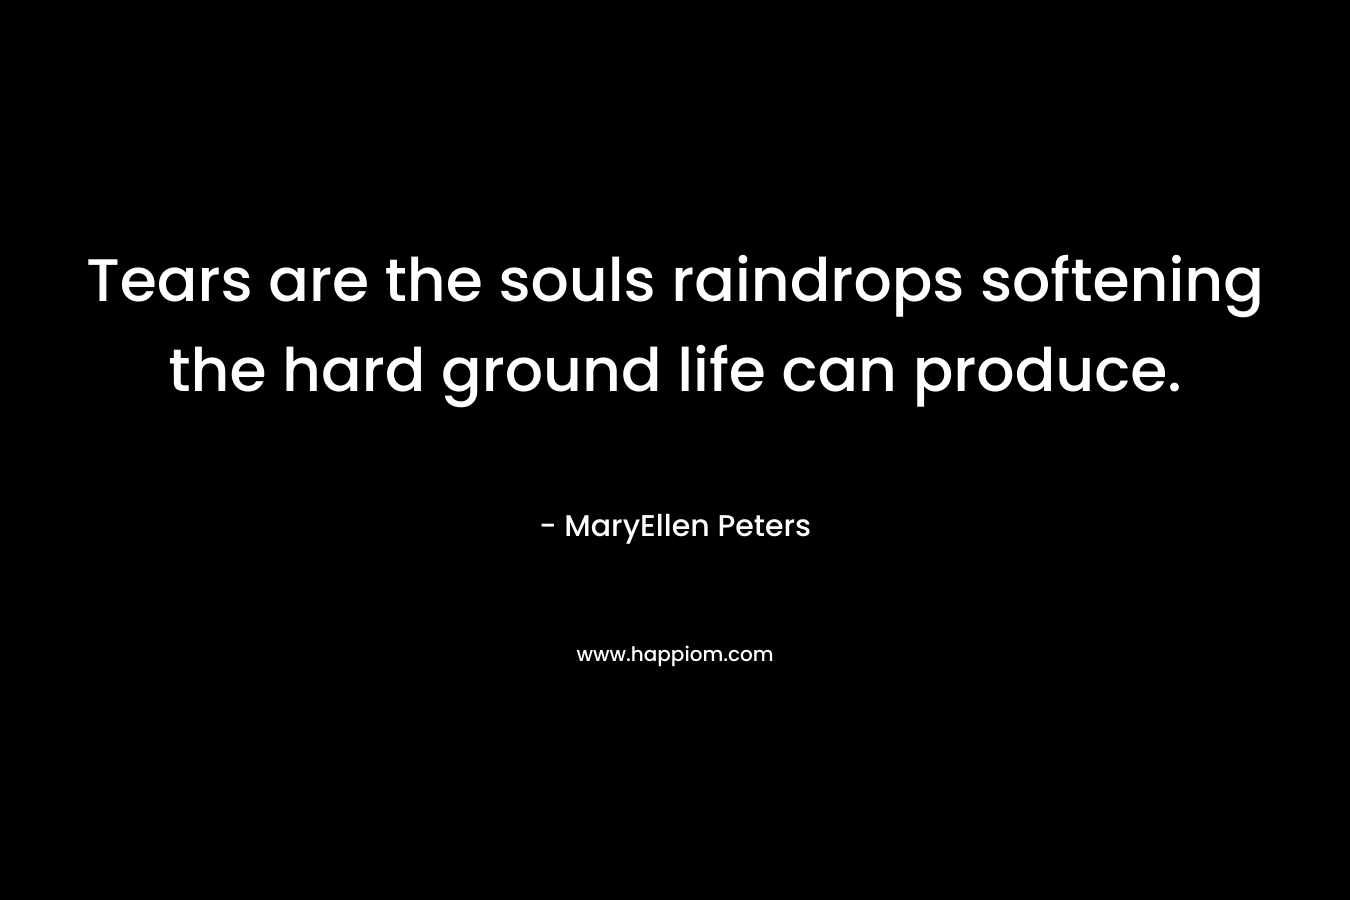 Tears are the souls raindrops softening the hard ground life can produce. – MaryEllen Peters